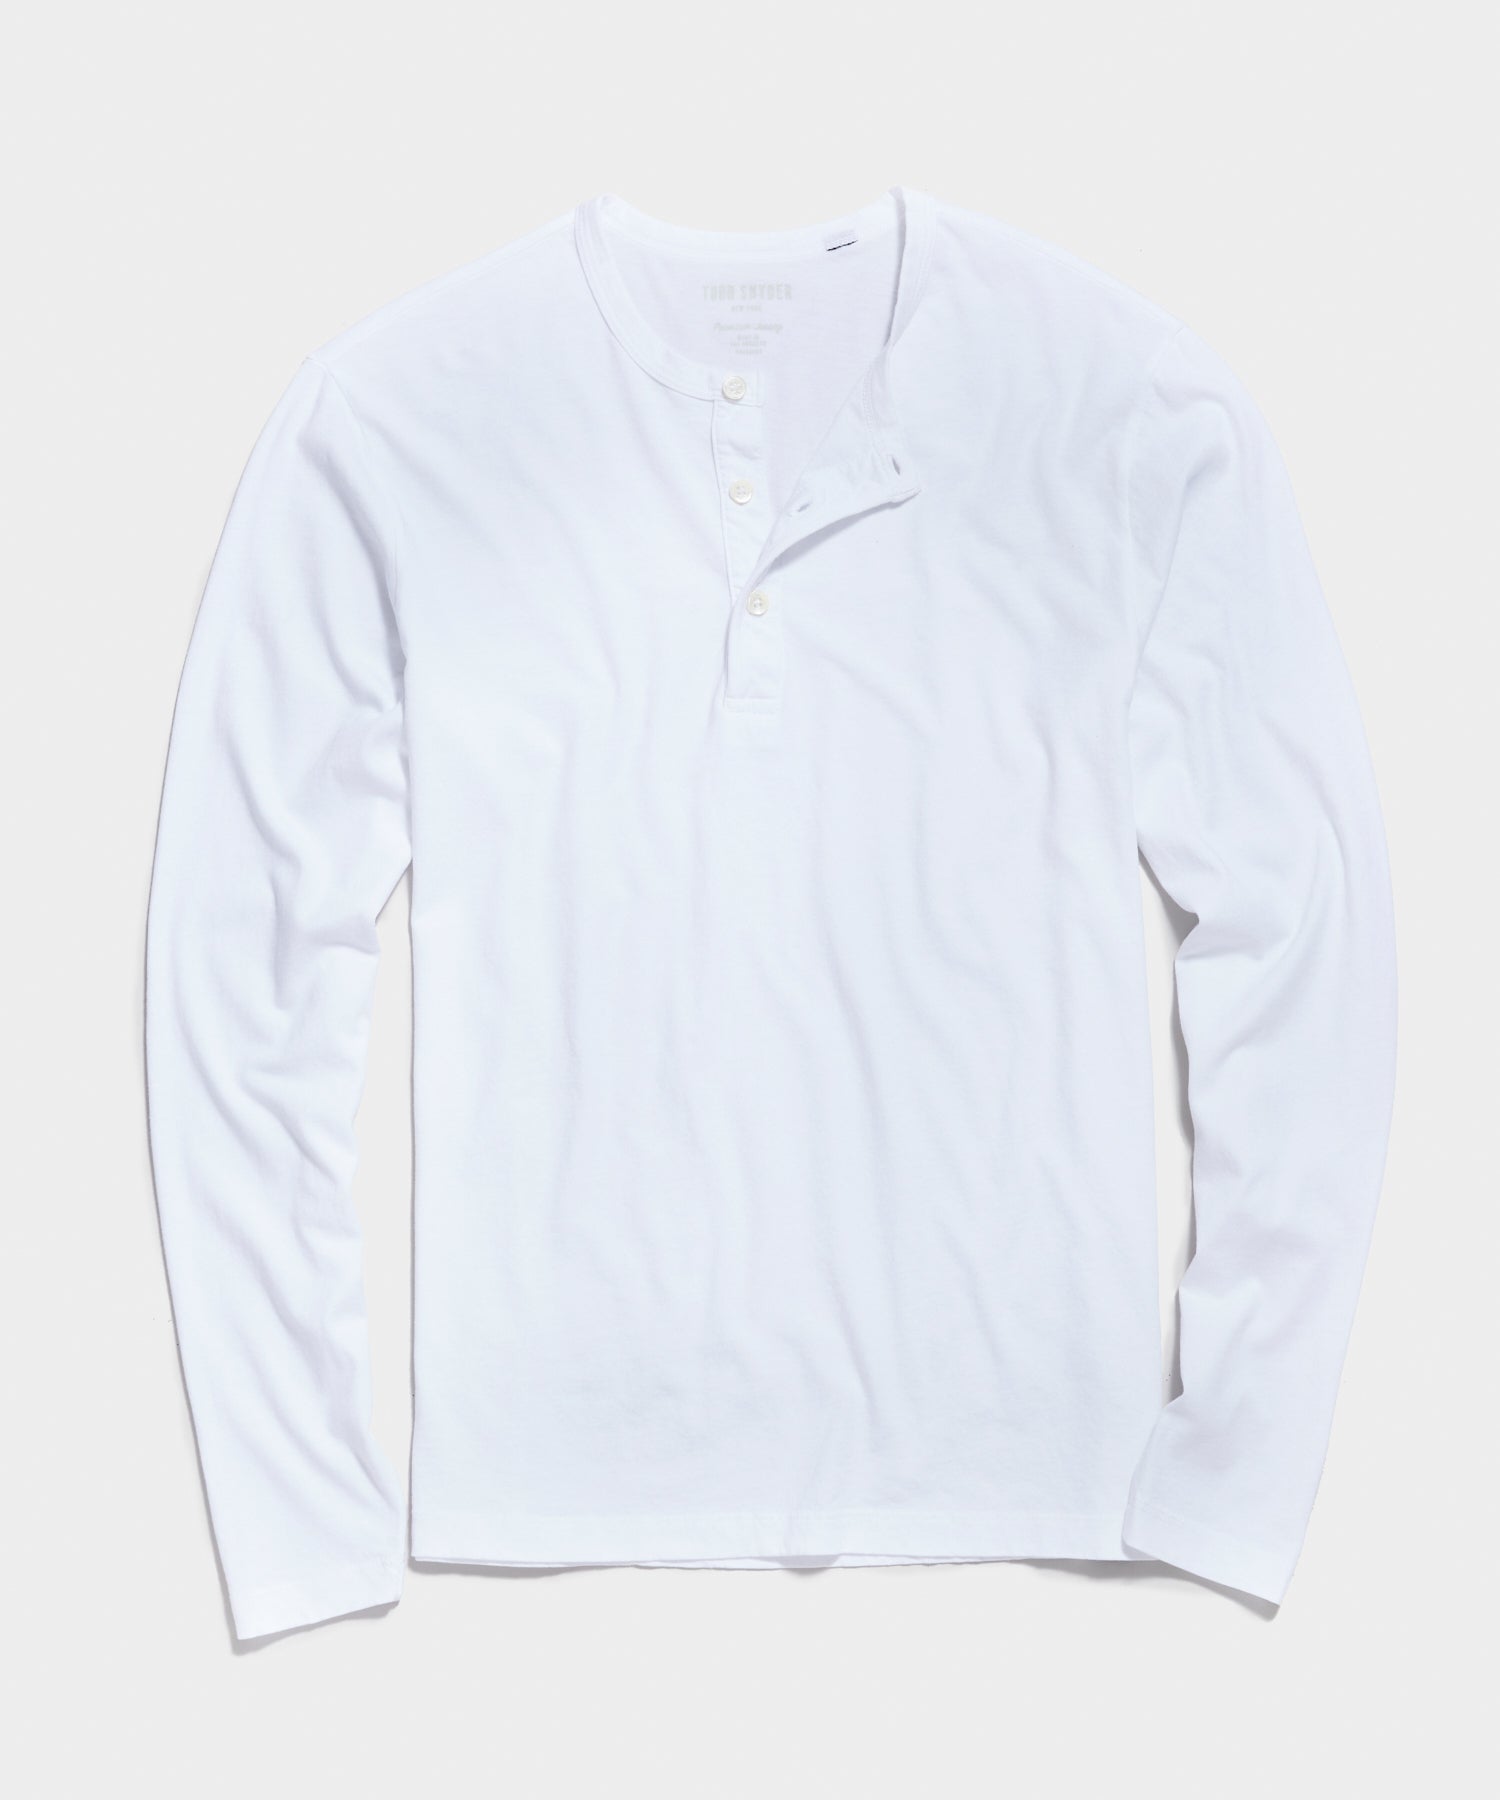 Made in L.A. Long Sleeve Premium Jersey Henley in White